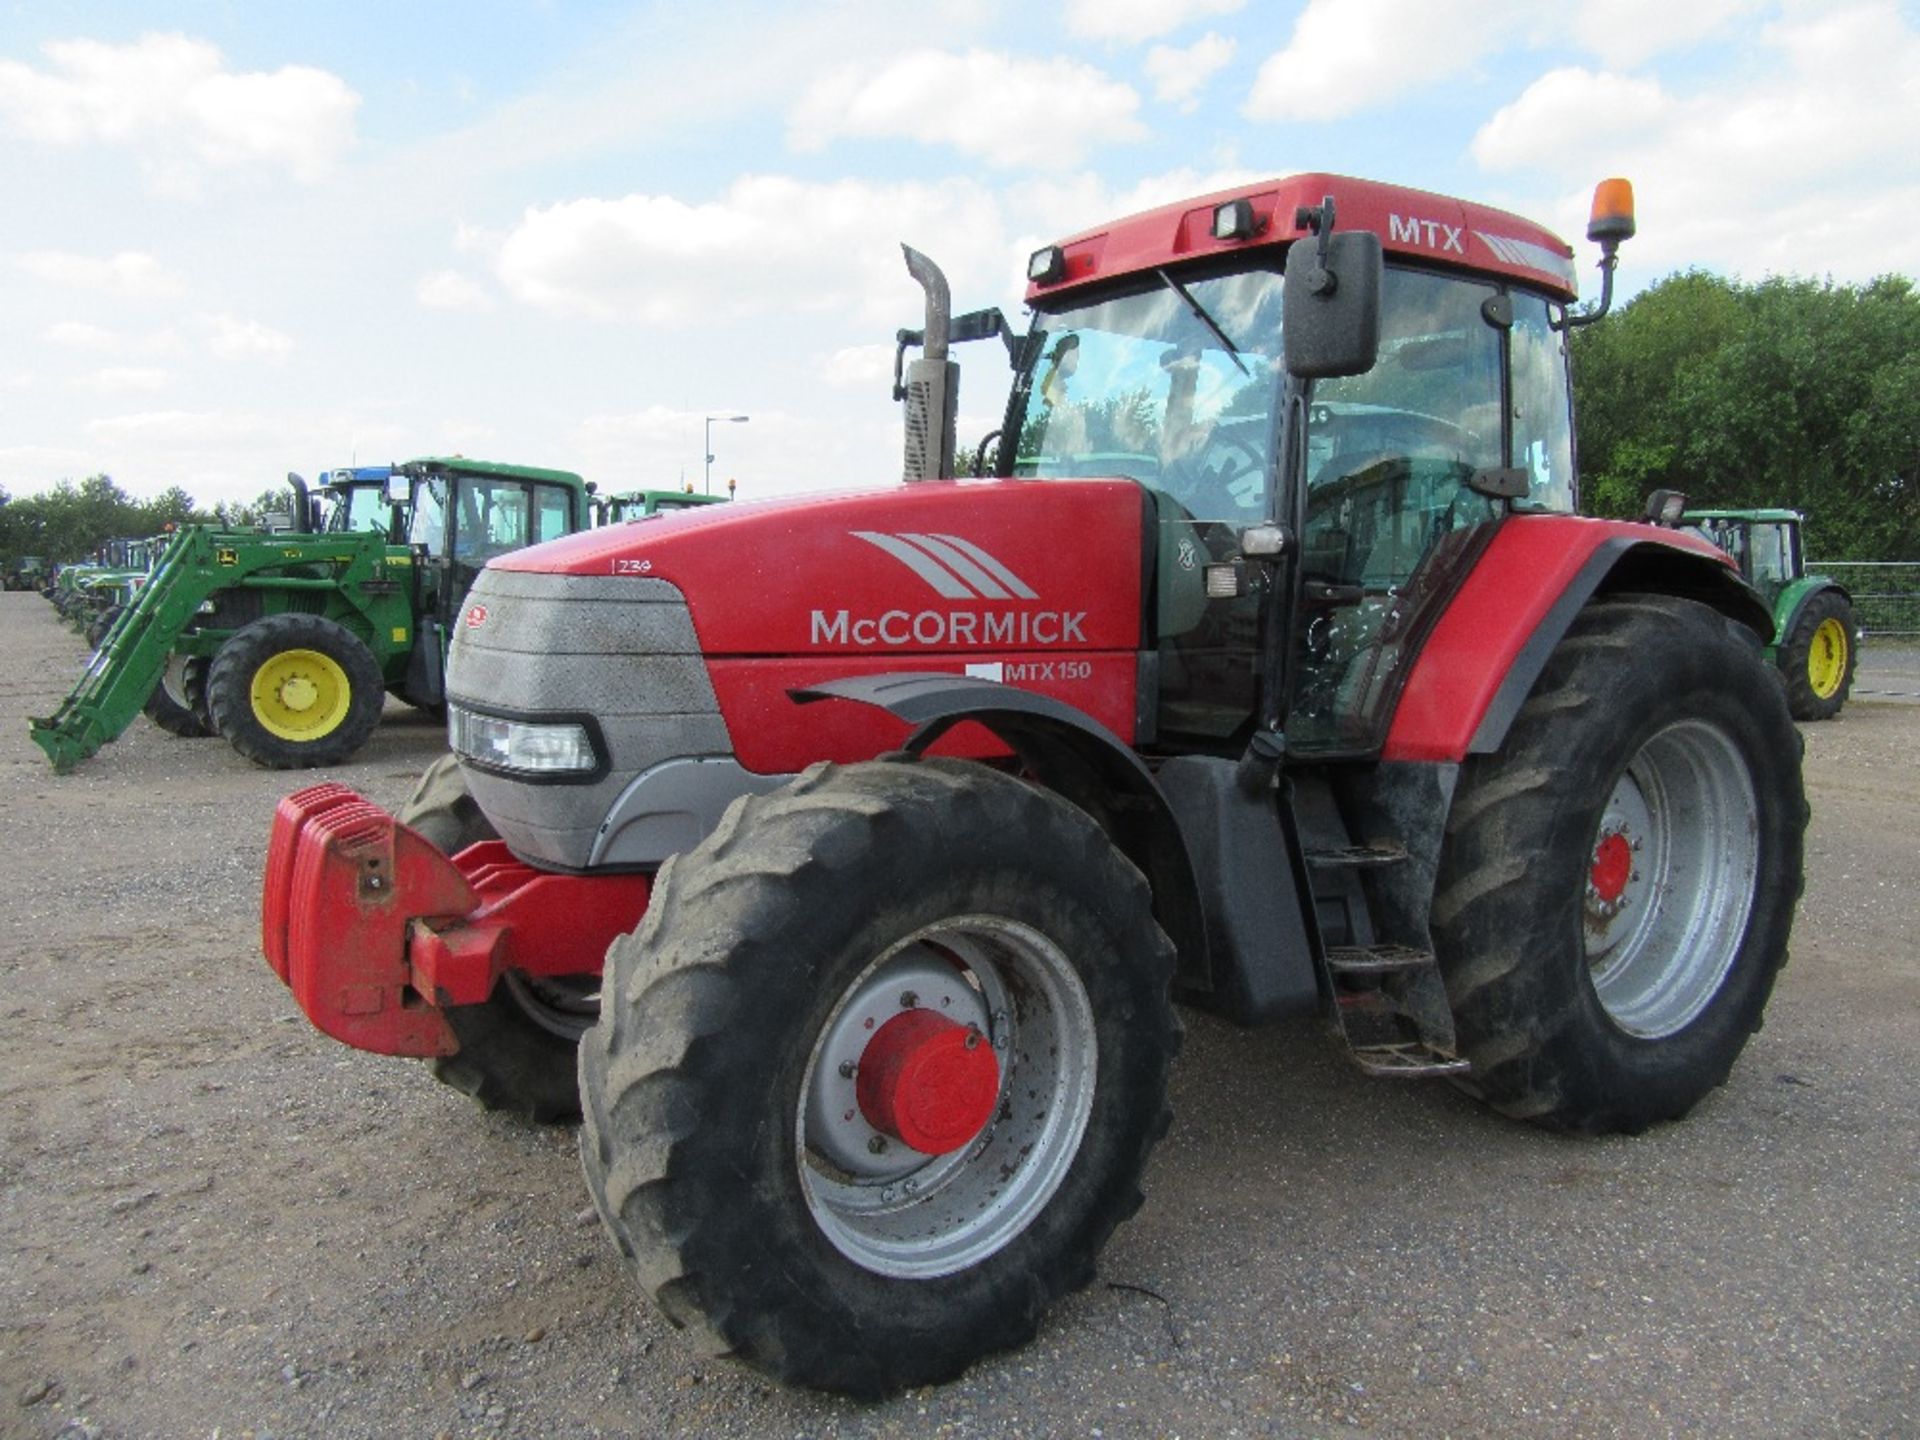 McCormick MTX150 40k Tractor with Front & Cab Suspension, Front Weights, Air Seat & Air Con. V5 will